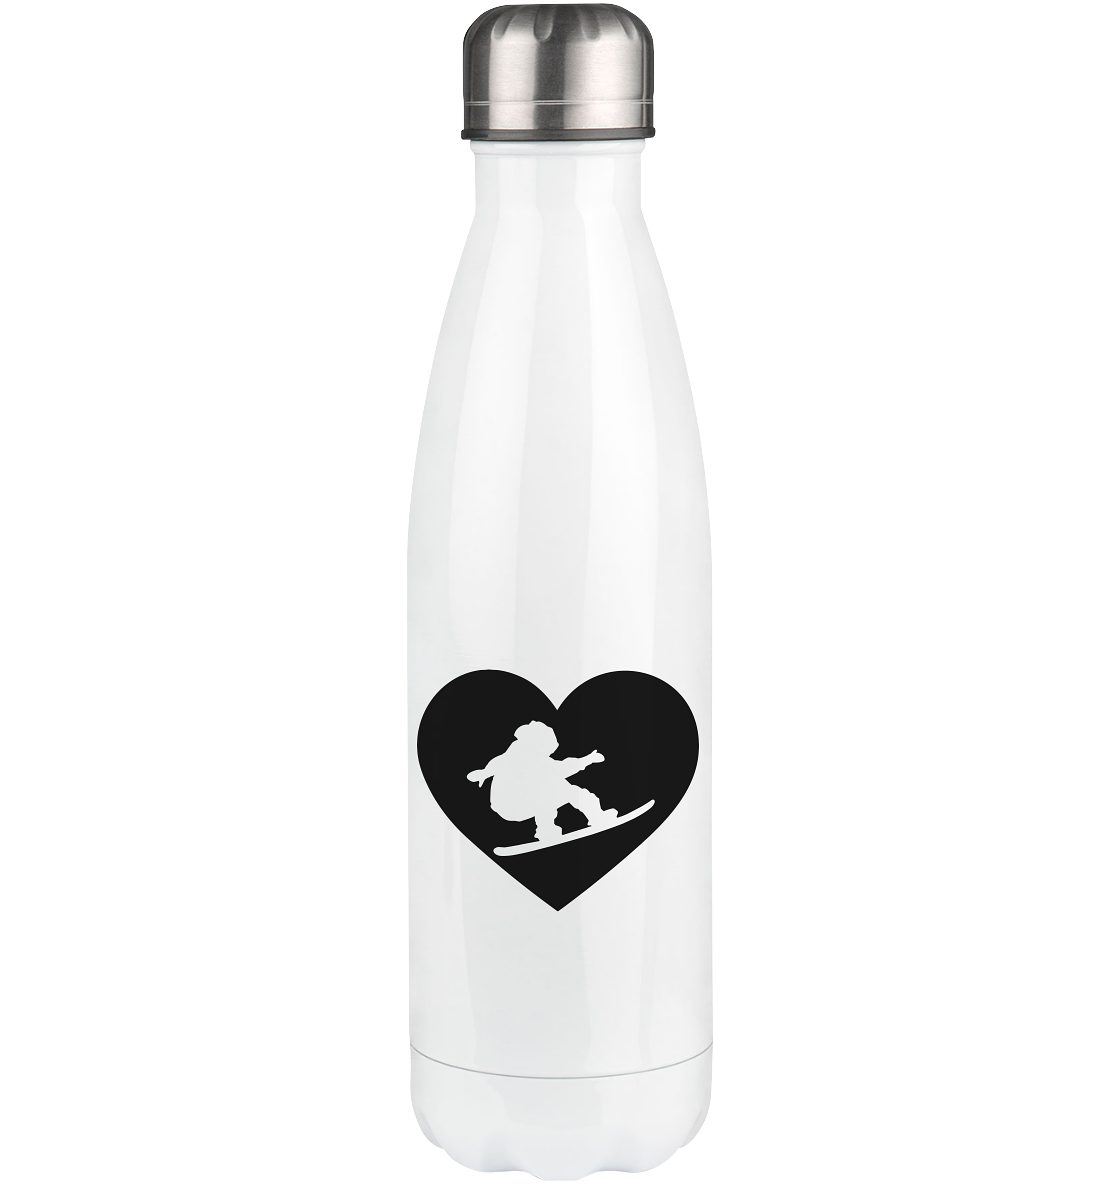 Heart 1 and Snowboarding - Edelstahl Thermosflasche snowboarden 500ml